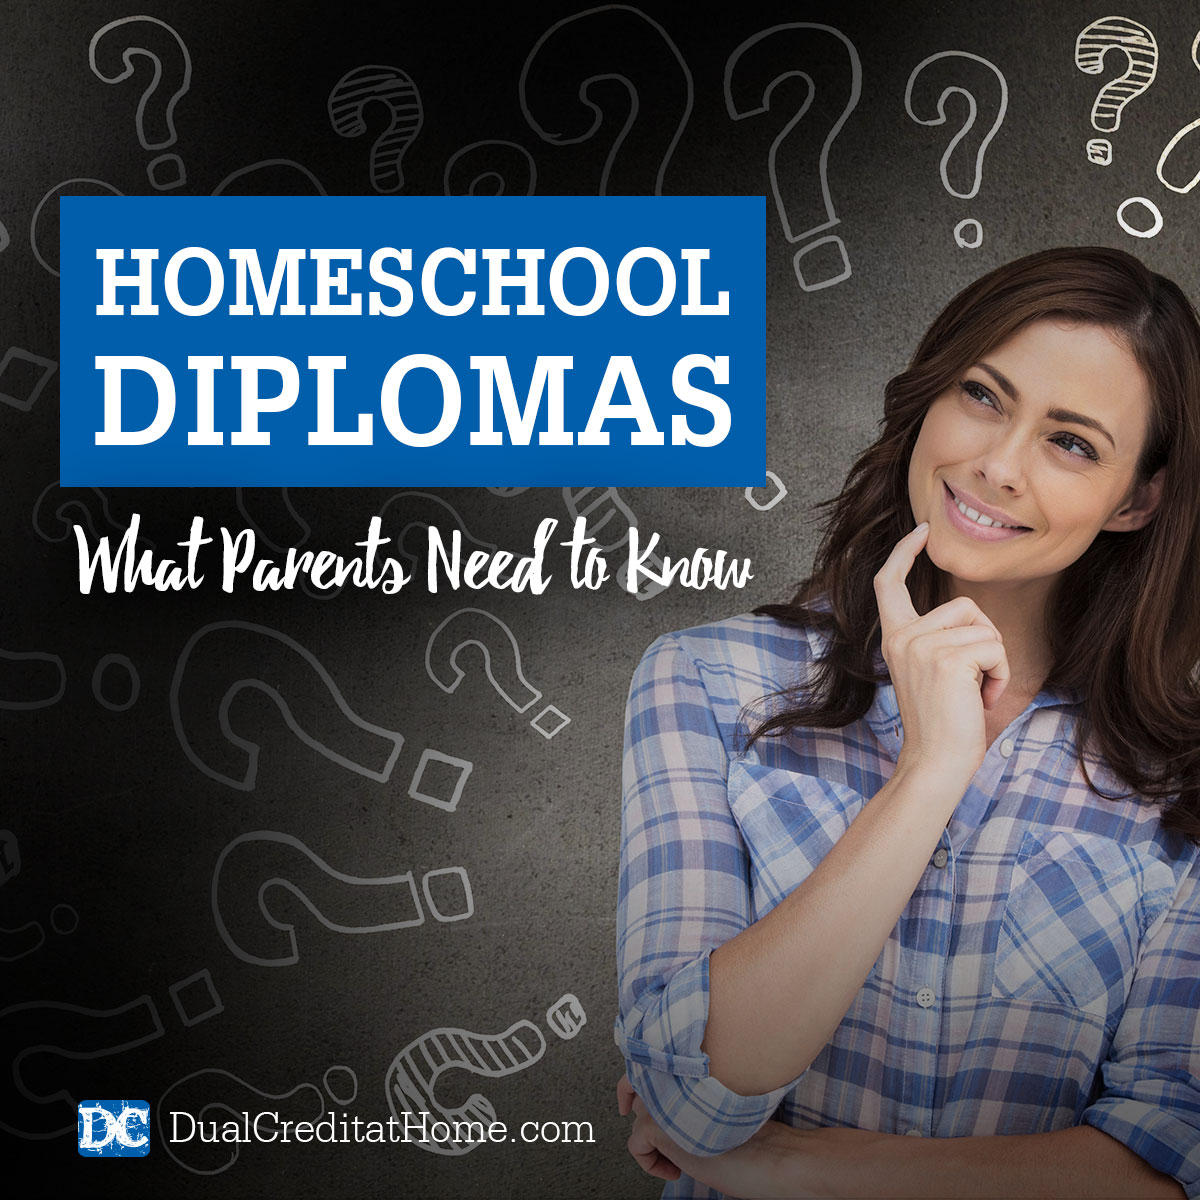 Homeschool Diplomas: What Parents Need to Know